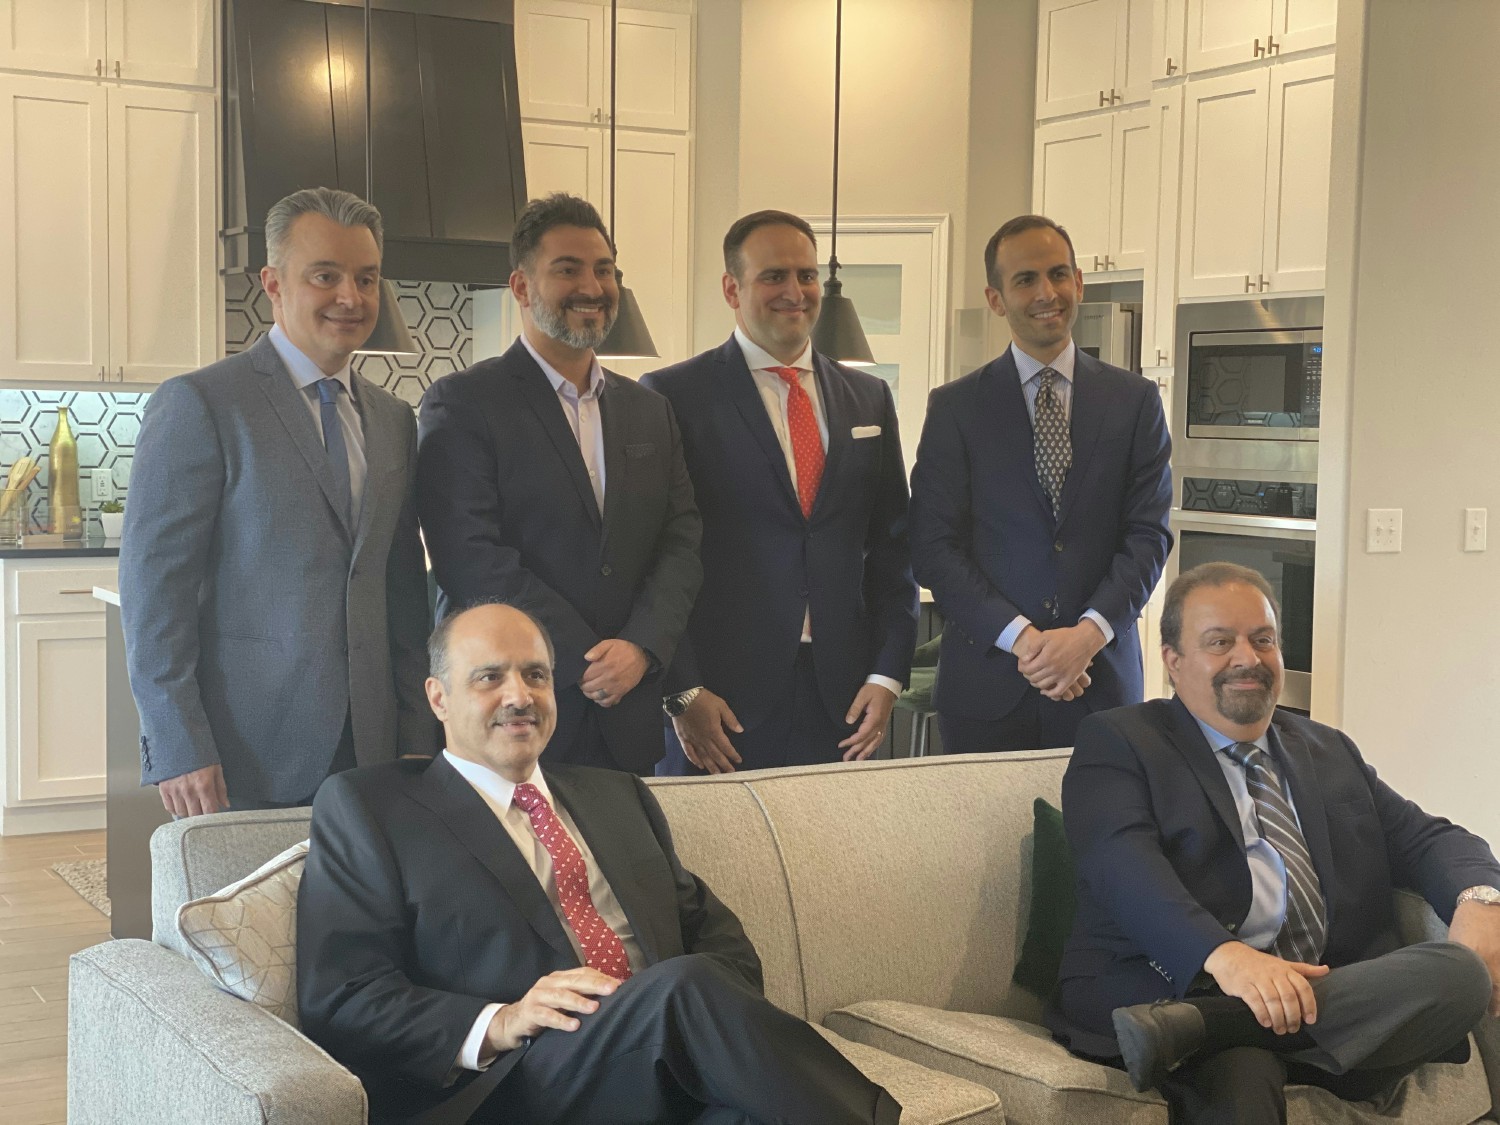 Back Row: MJ, Vahid, Hossein, Ali Farzaneh
Front Row: Jalal and Mohammad Farzaneh, in model home built by Home Creations